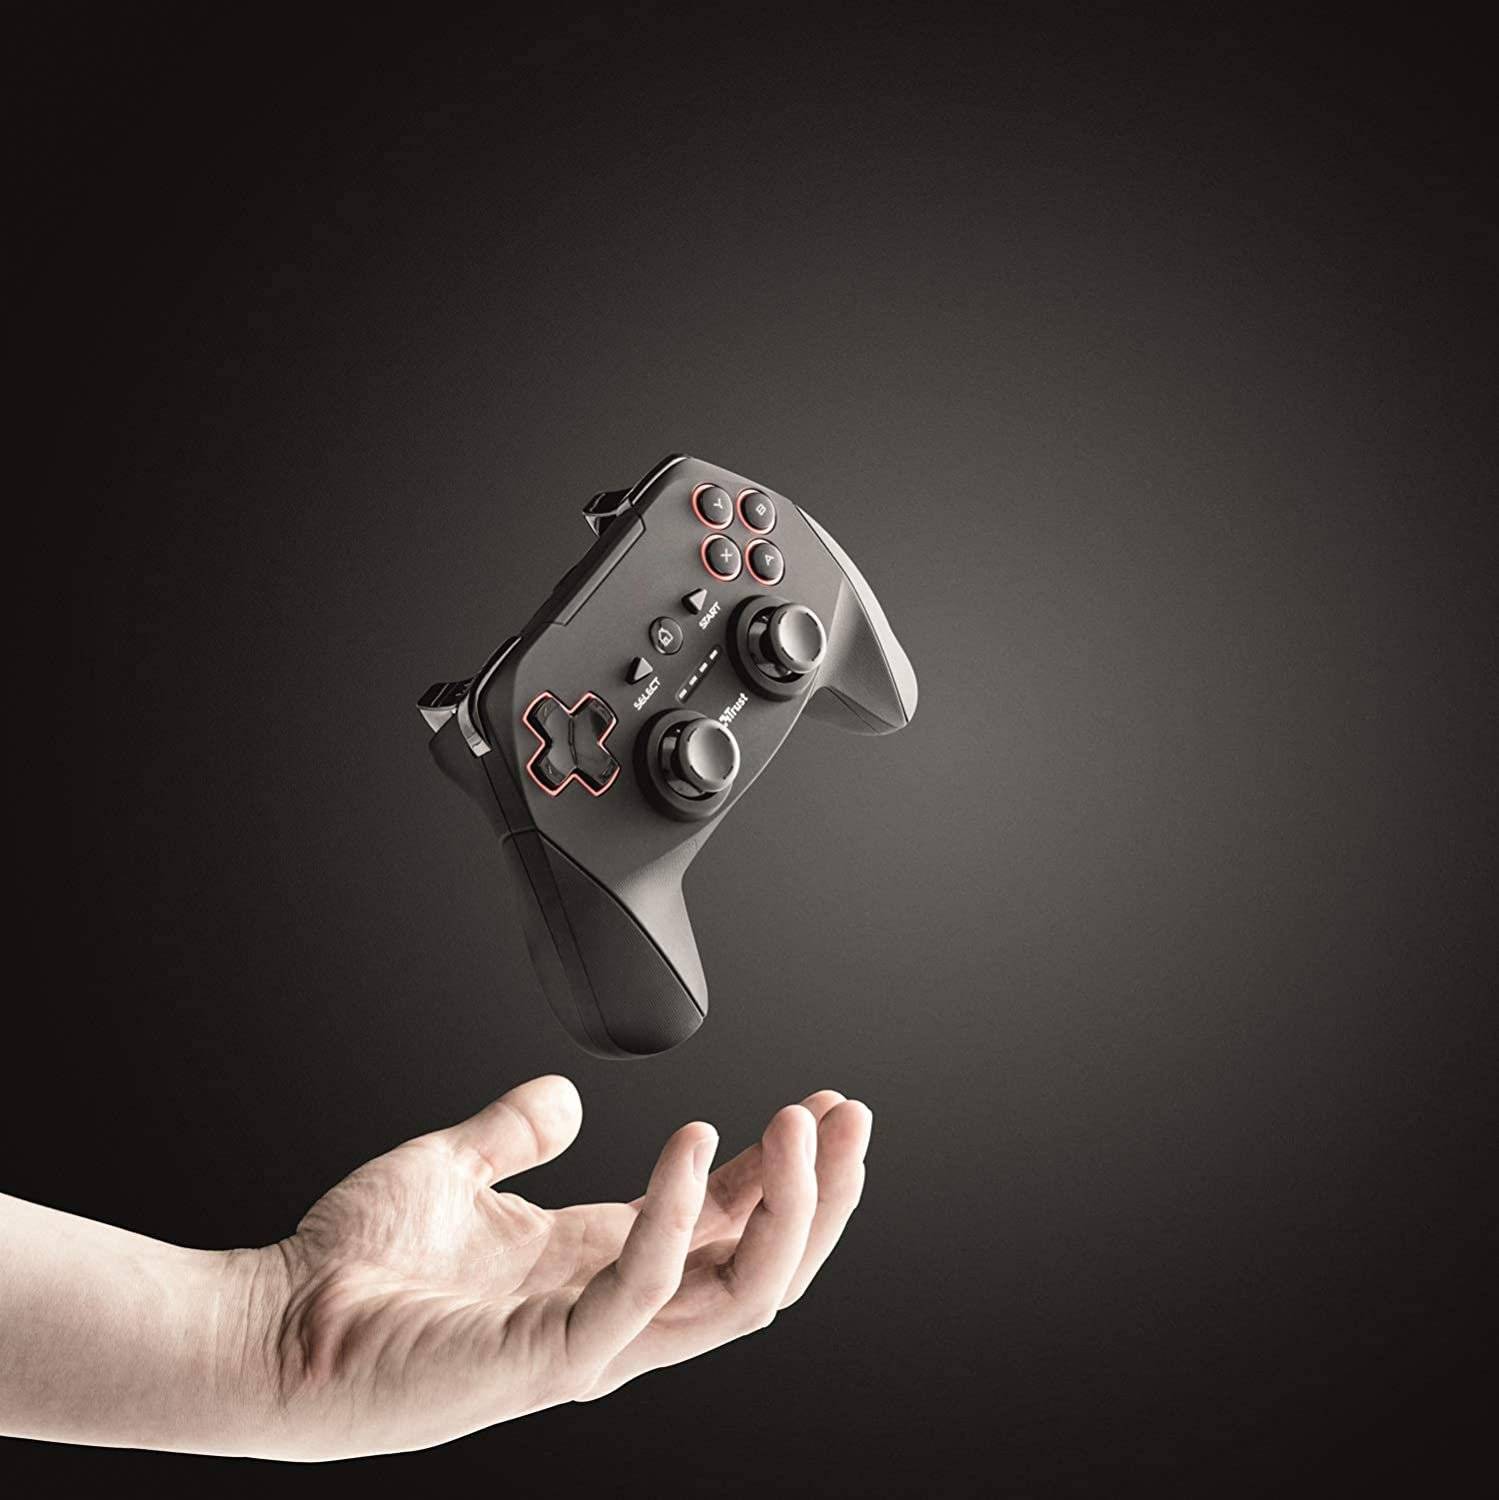 DroiX R1 Gamepad for Play Station 3, PC, RetroPie Gaming Console - Showing Controller being thrown in air